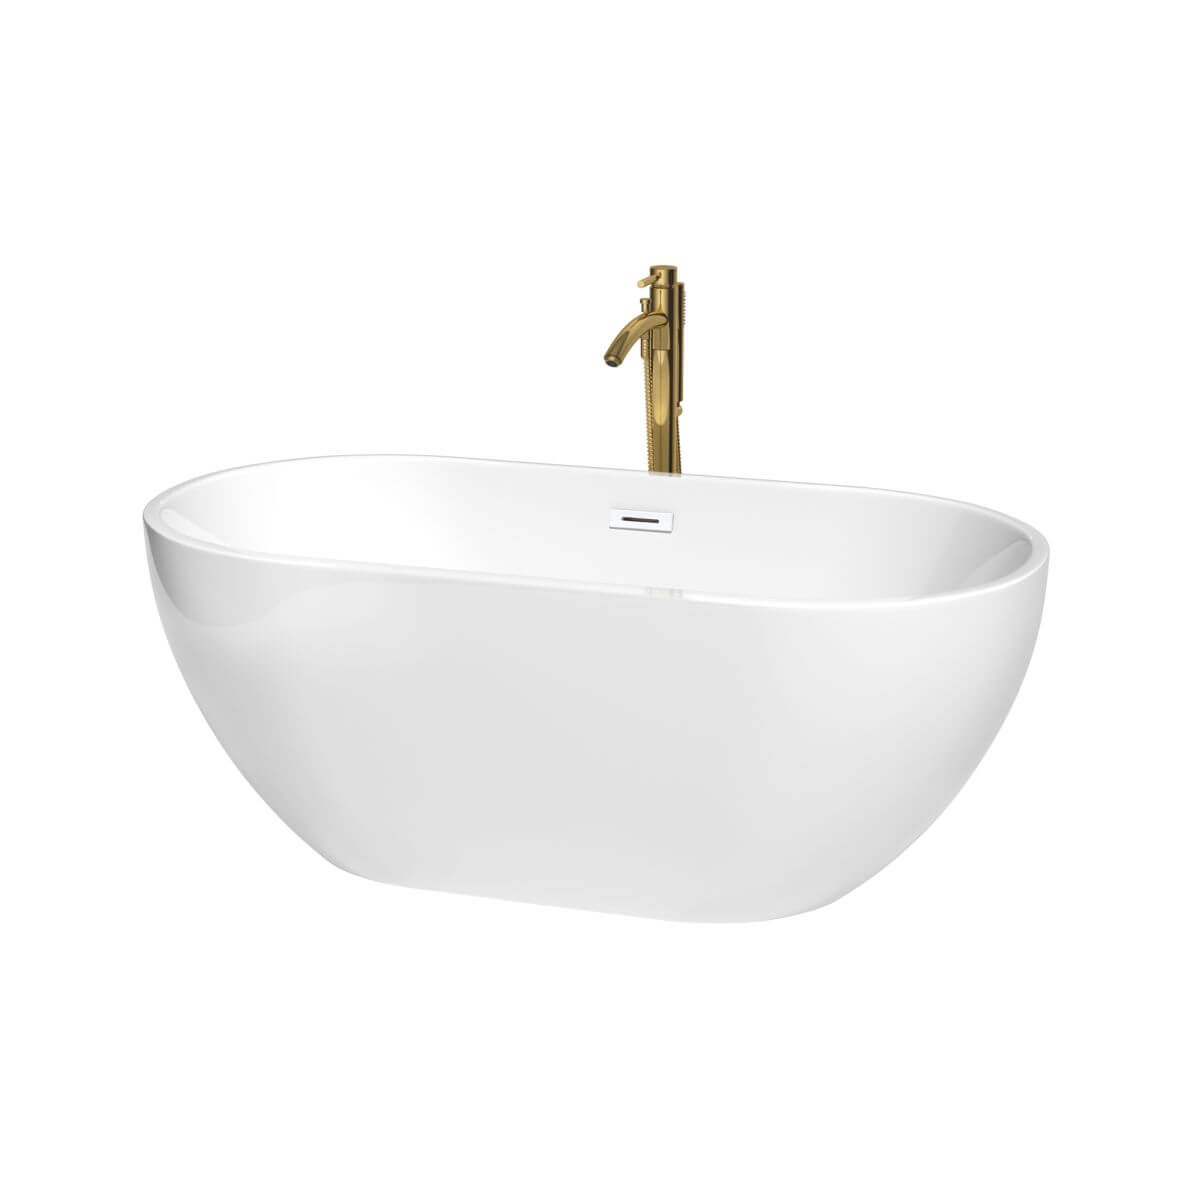 Wyndham Collection Brooklyn 60 inch Freestanding Bathtub in White with Shiny White Trim and Floor Mounted Faucet in Brushed Gold - WCOBT200060SWATPGD